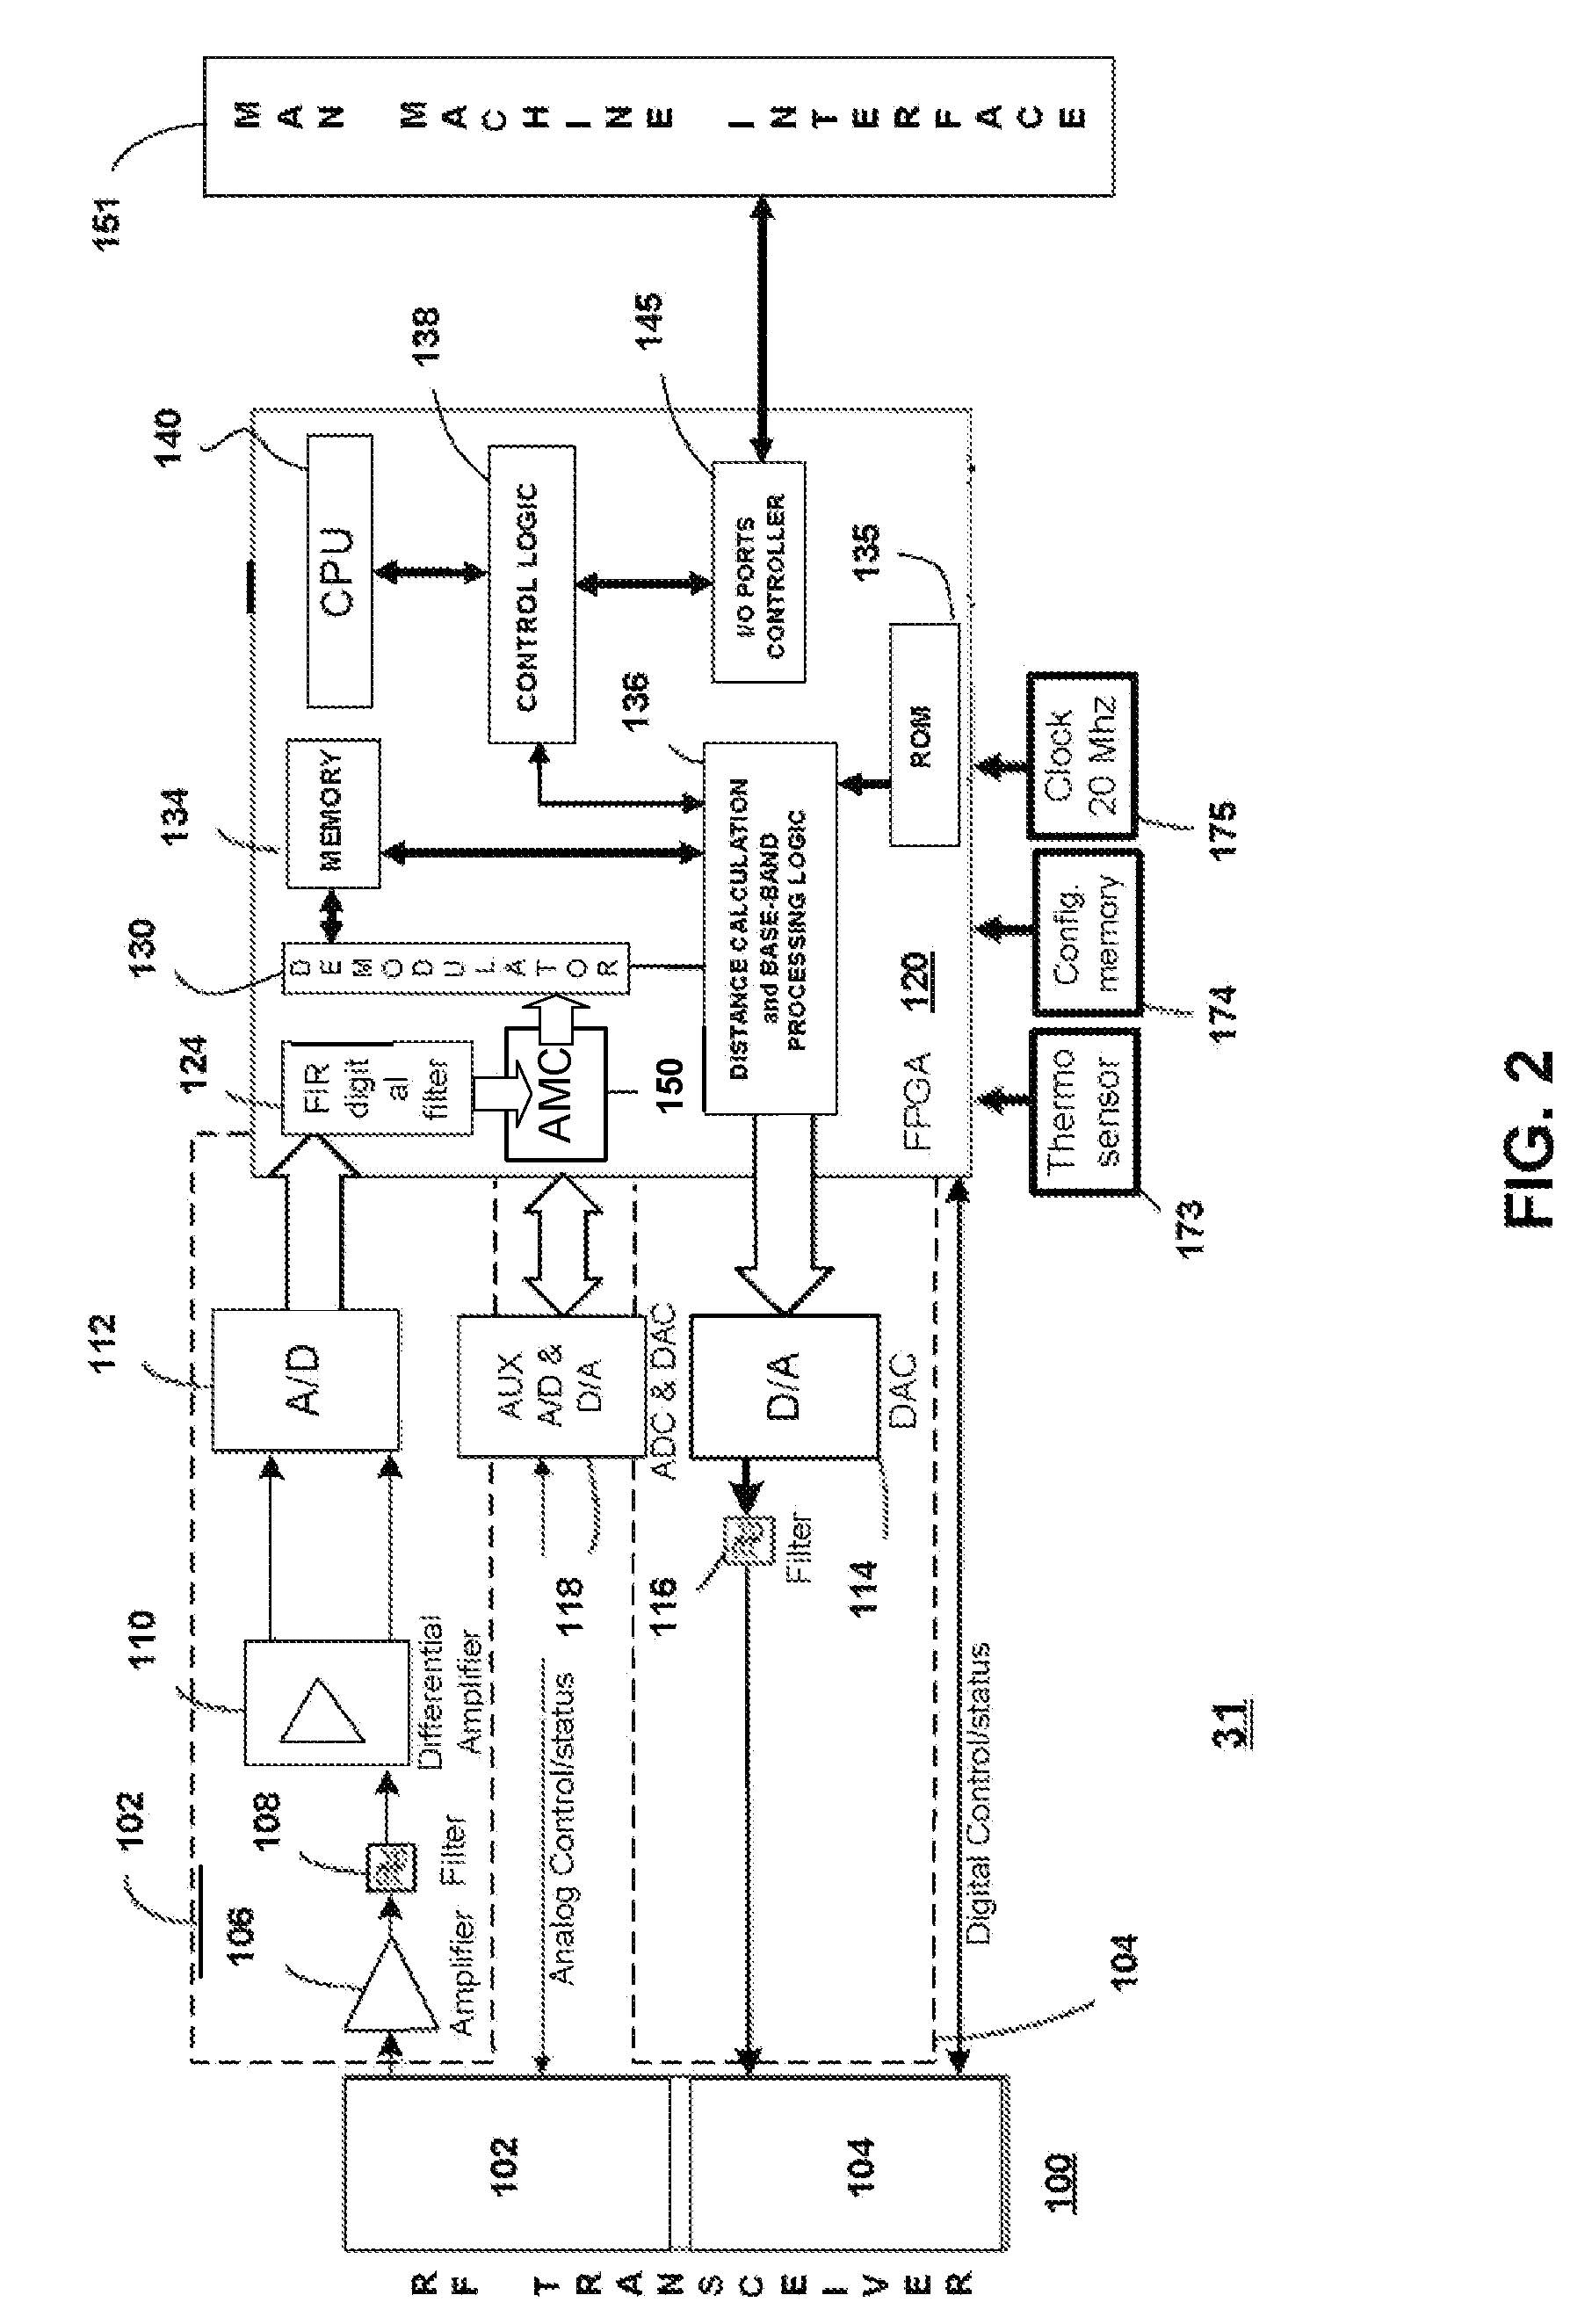 Methods and system for reduced attenuation in tracking objects using RF technology